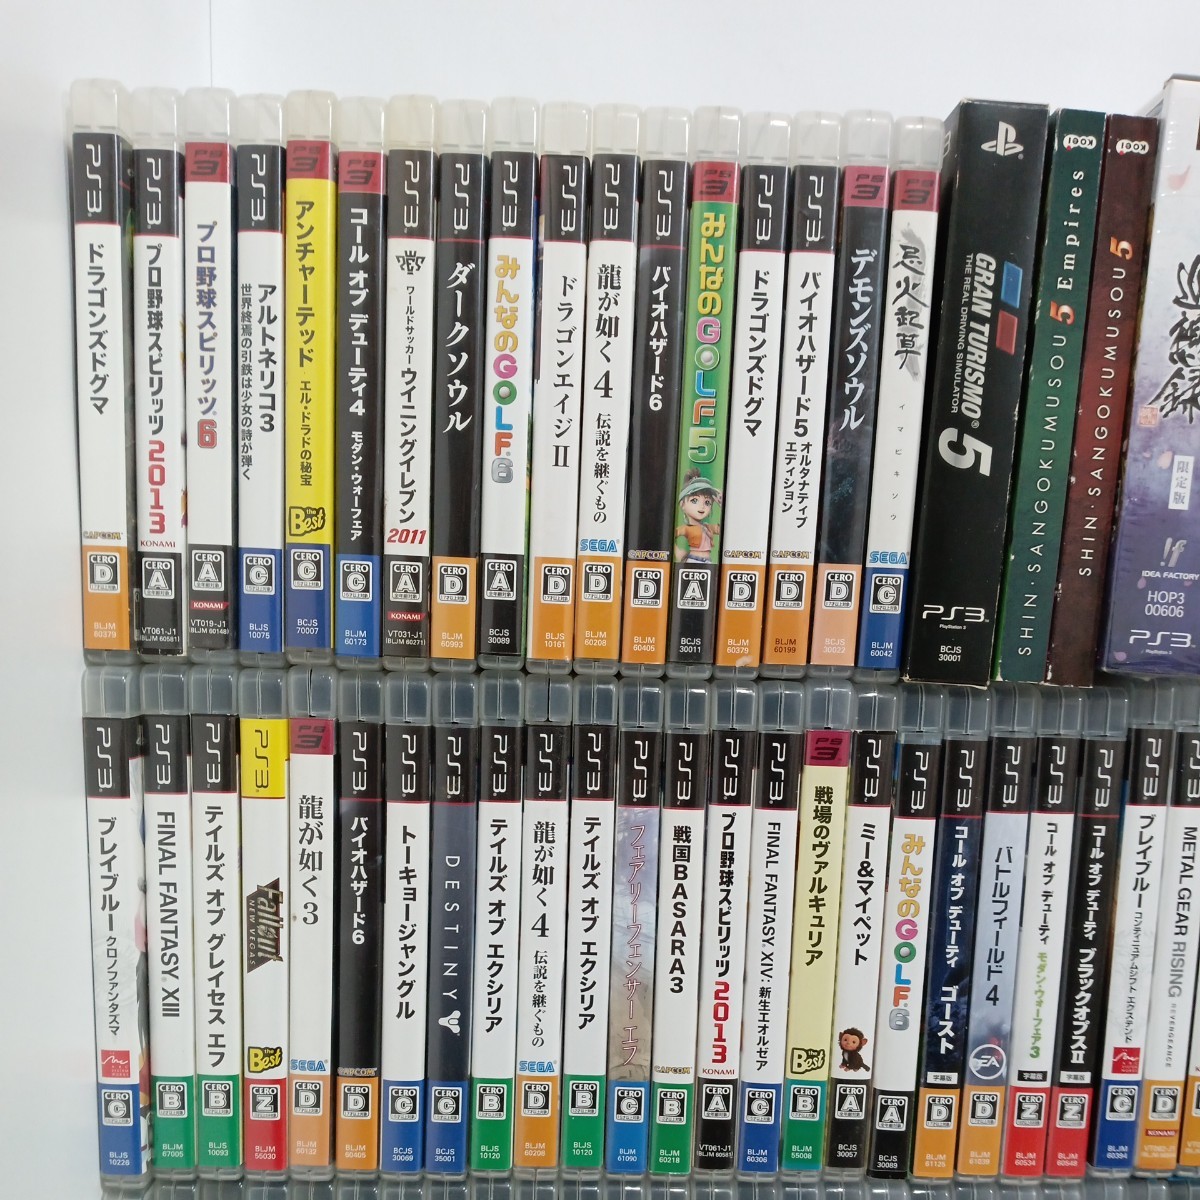 3 PS3 game soft [ Junk ]1 jpy ~ set sale PlayStation 3PlayStation masterpiece popular work 127ps.@ approximately 17.3. metal gear / Dragons dog ma other 